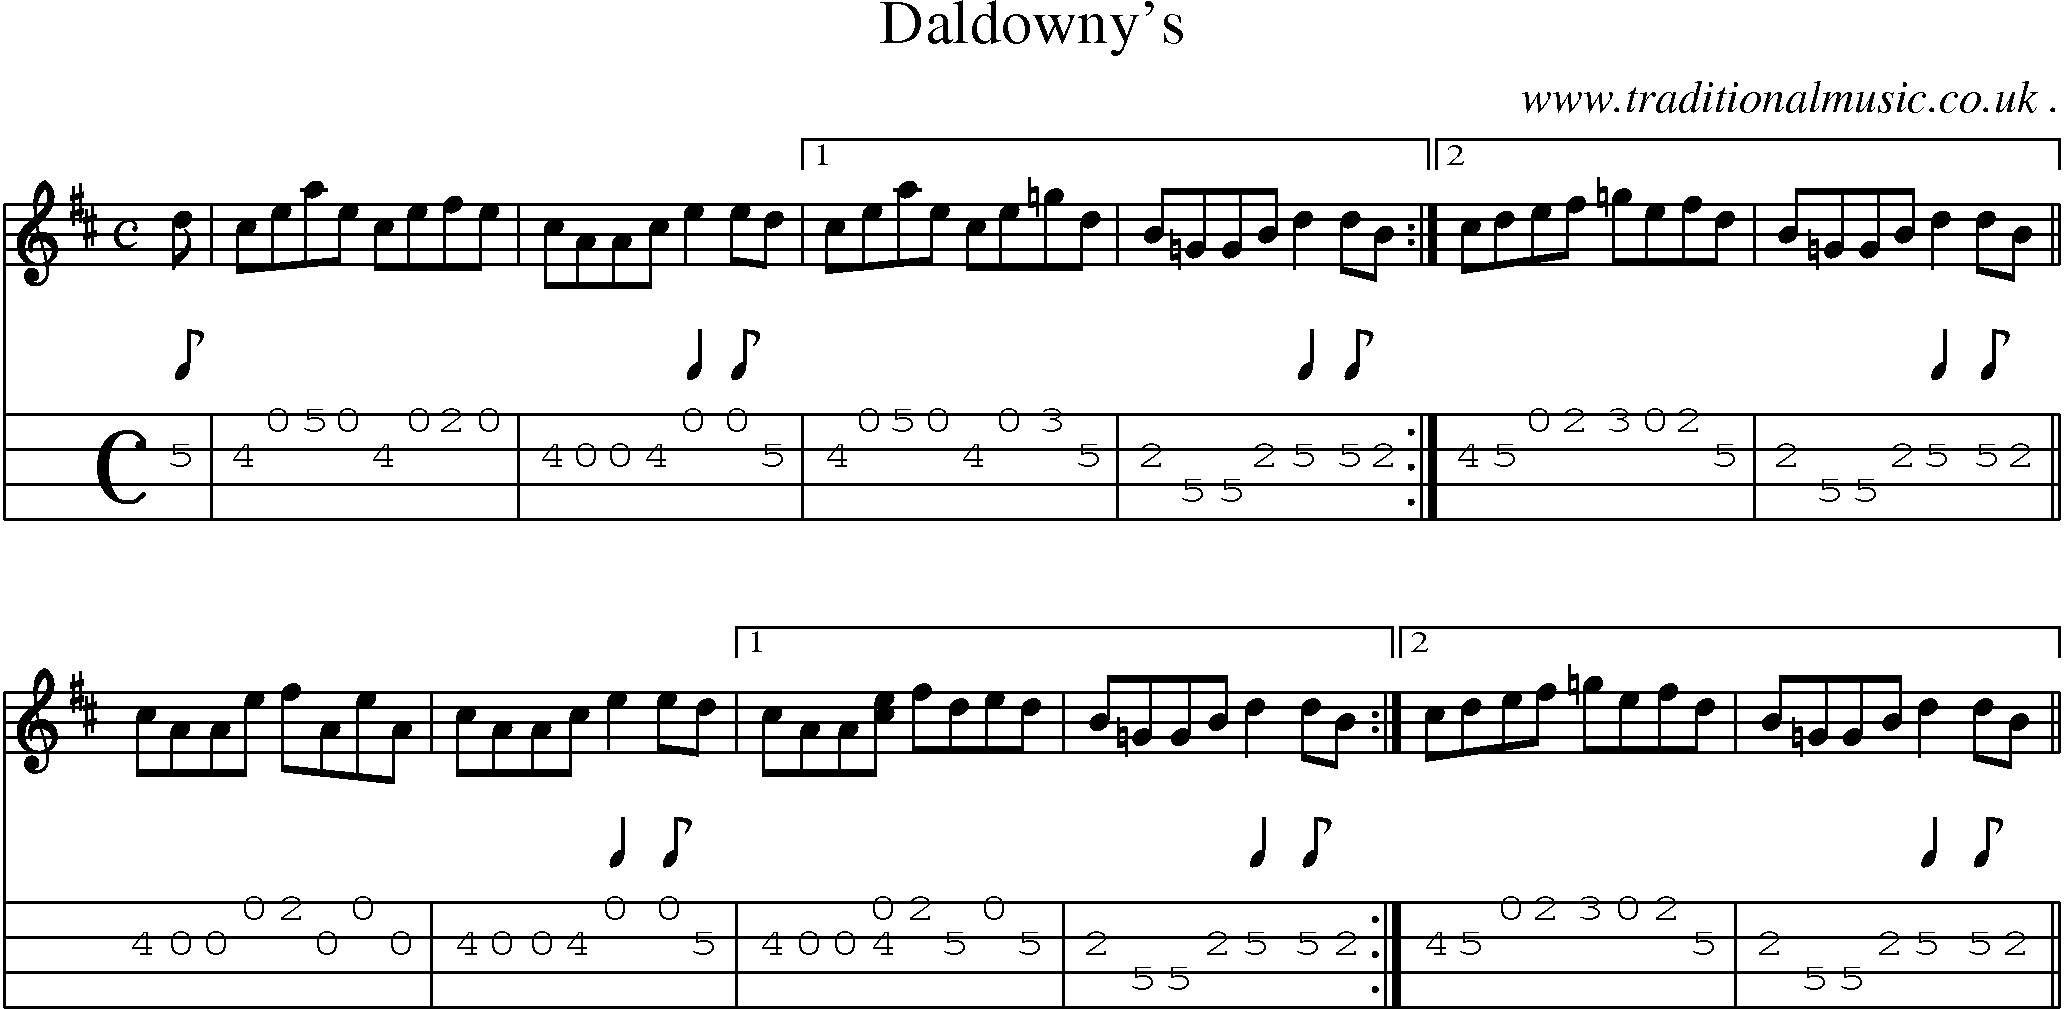 Sheet-music  score, Chords and Mandolin Tabs for Daldownys1